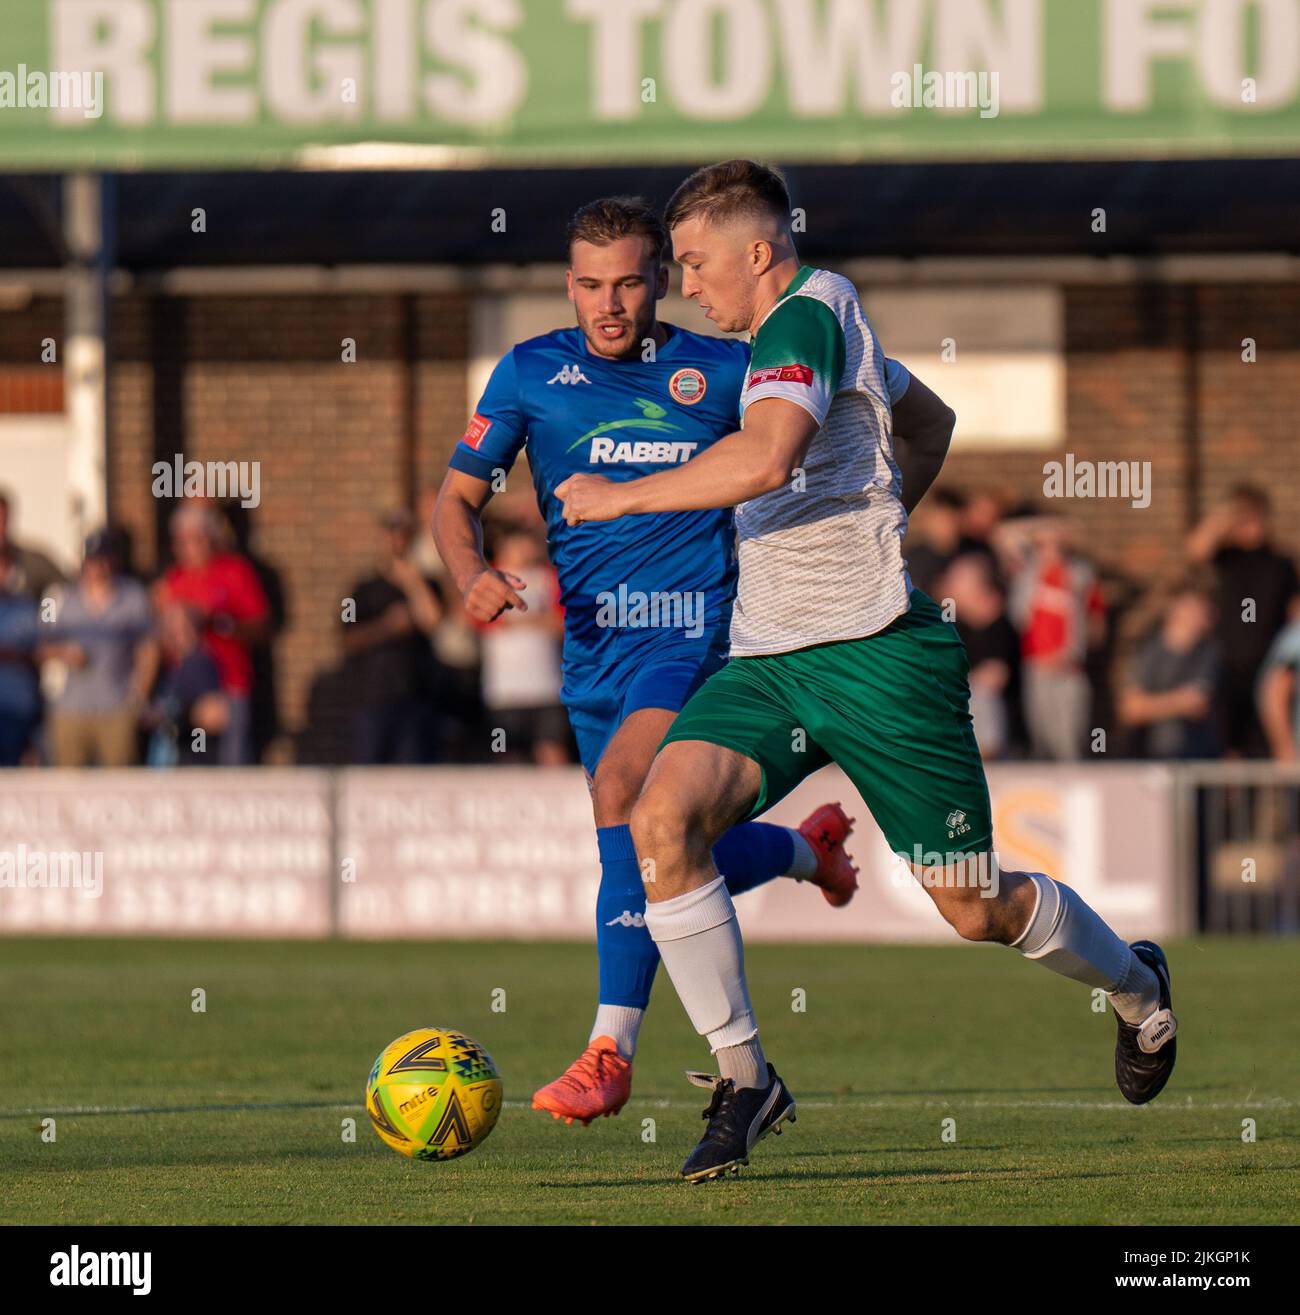 Soccer action a pre-season friendly match between Bognor Regis Town Football Club and Worthing FC. Two players tackle for the ball in front of fans. Stock Photo